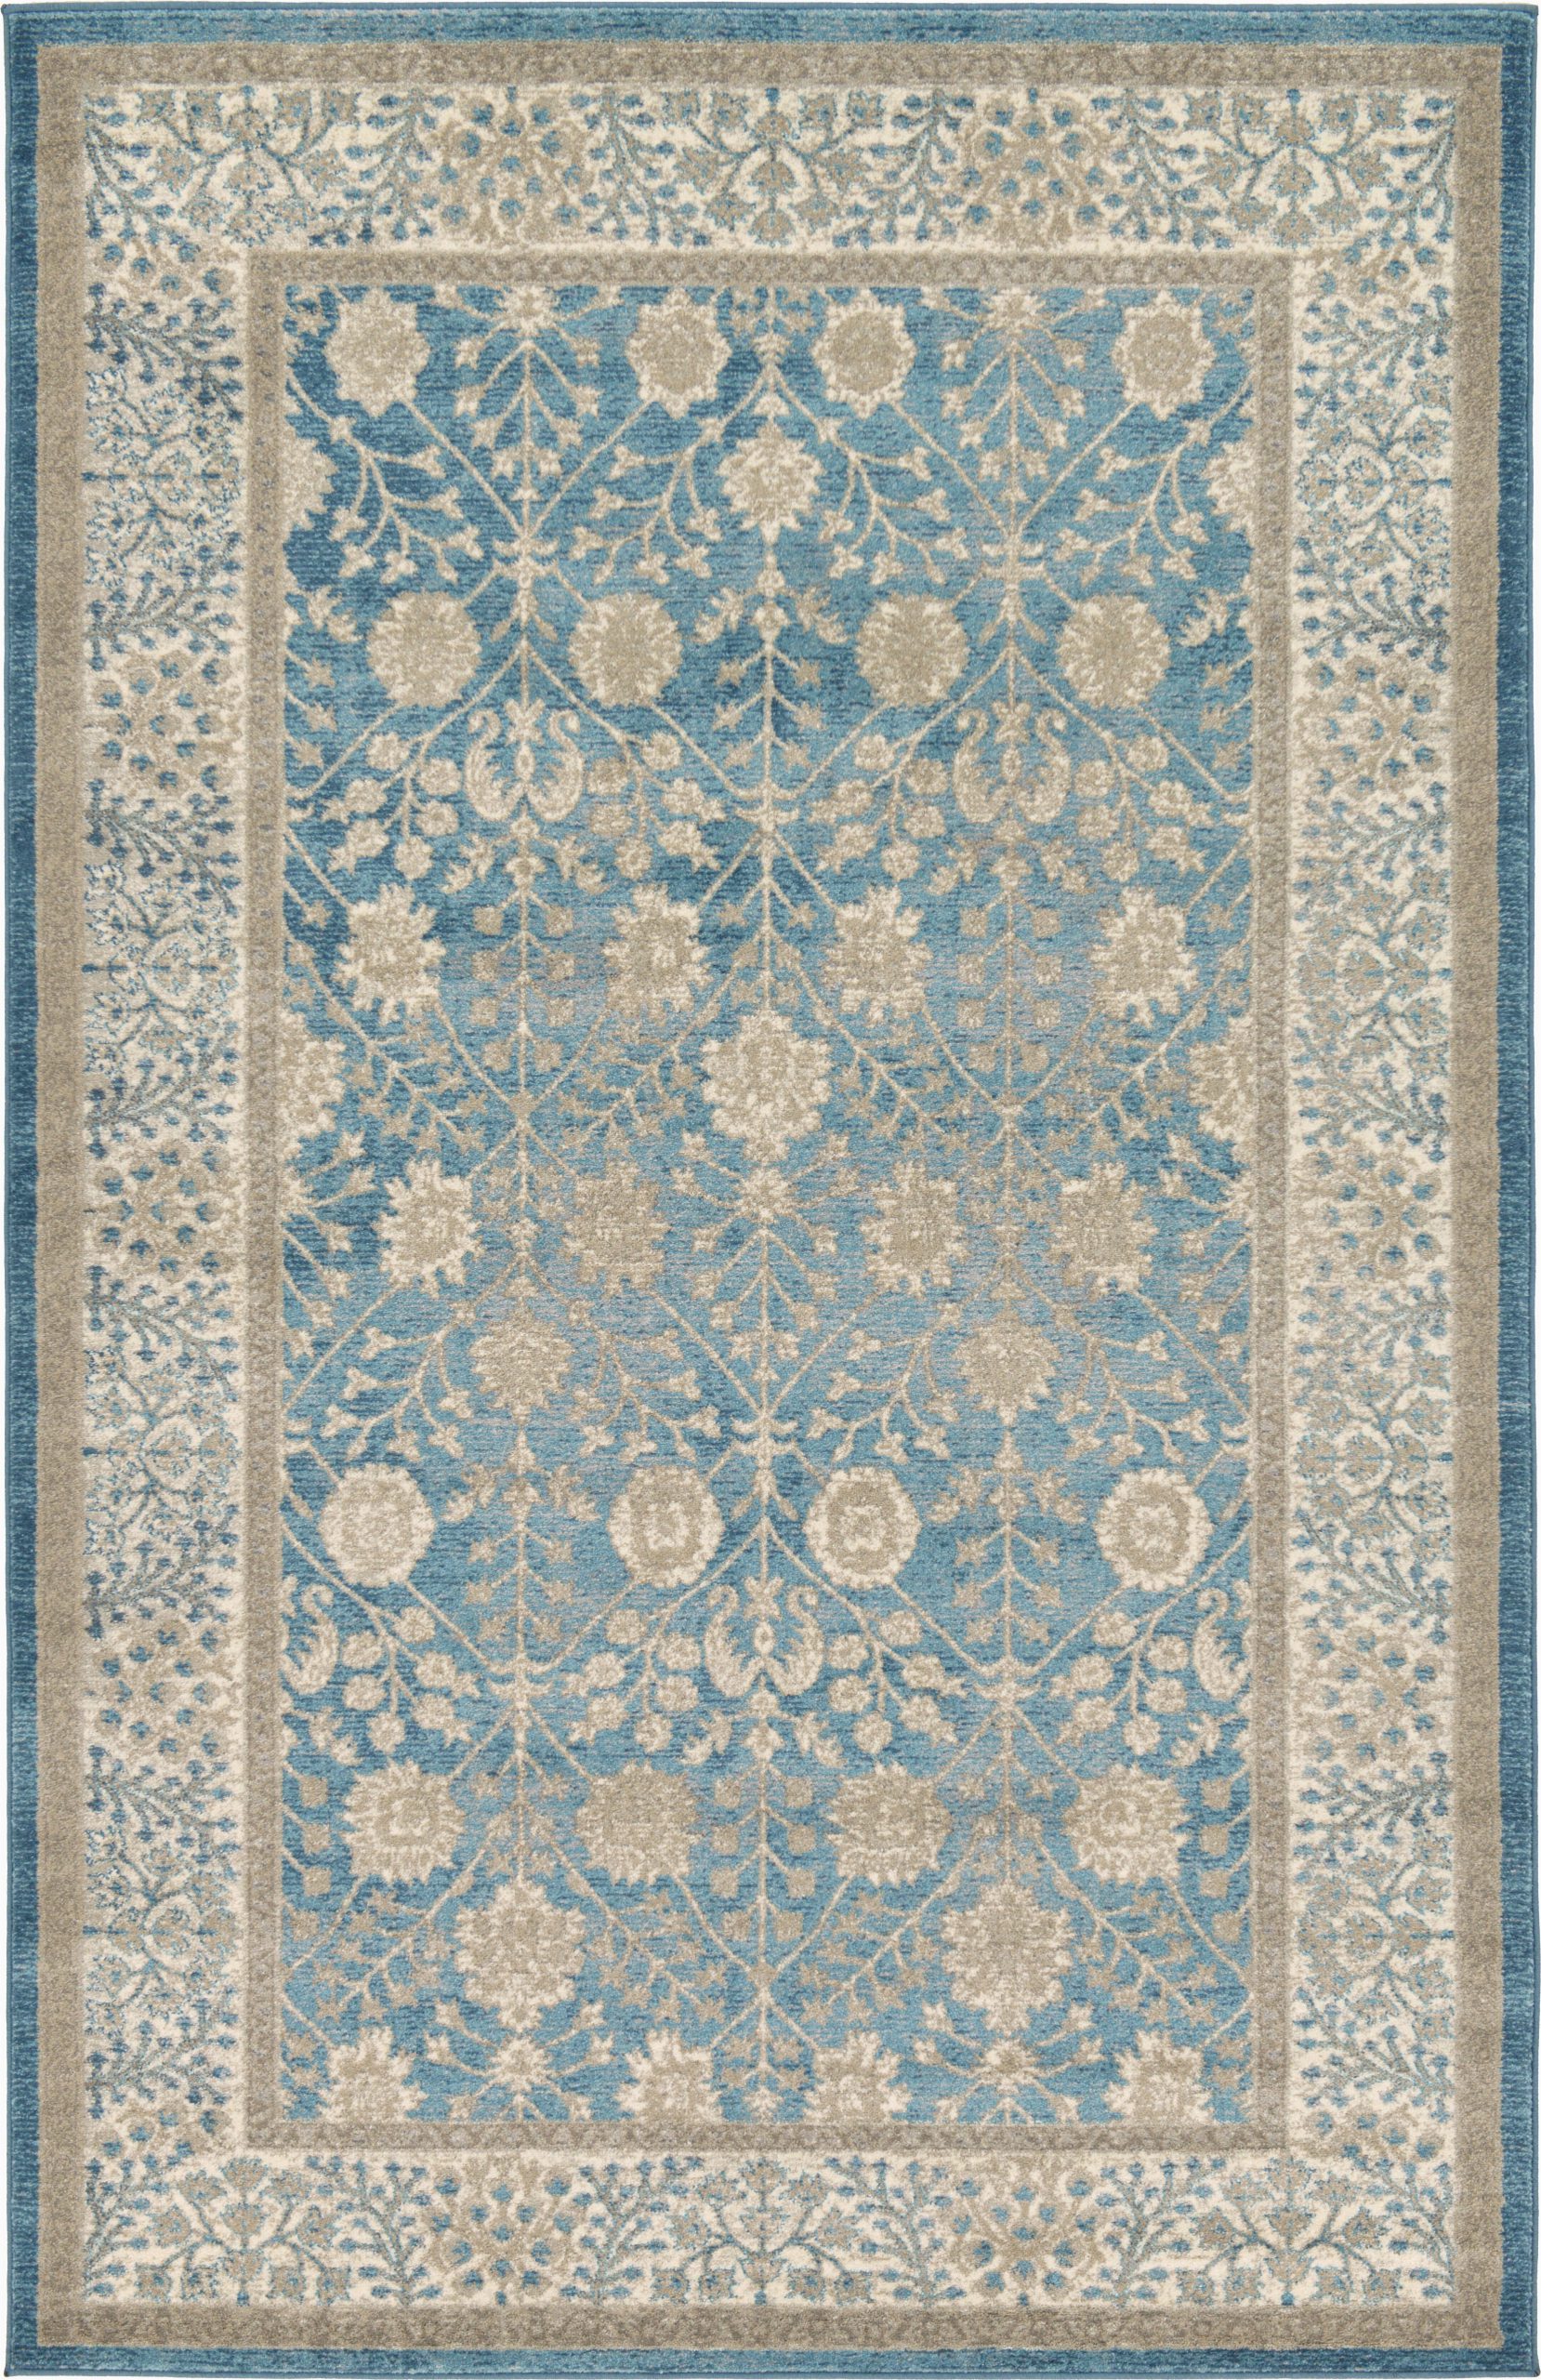 Blue Gray and Beige area Rug oriental Blue Gray Beige area Rug